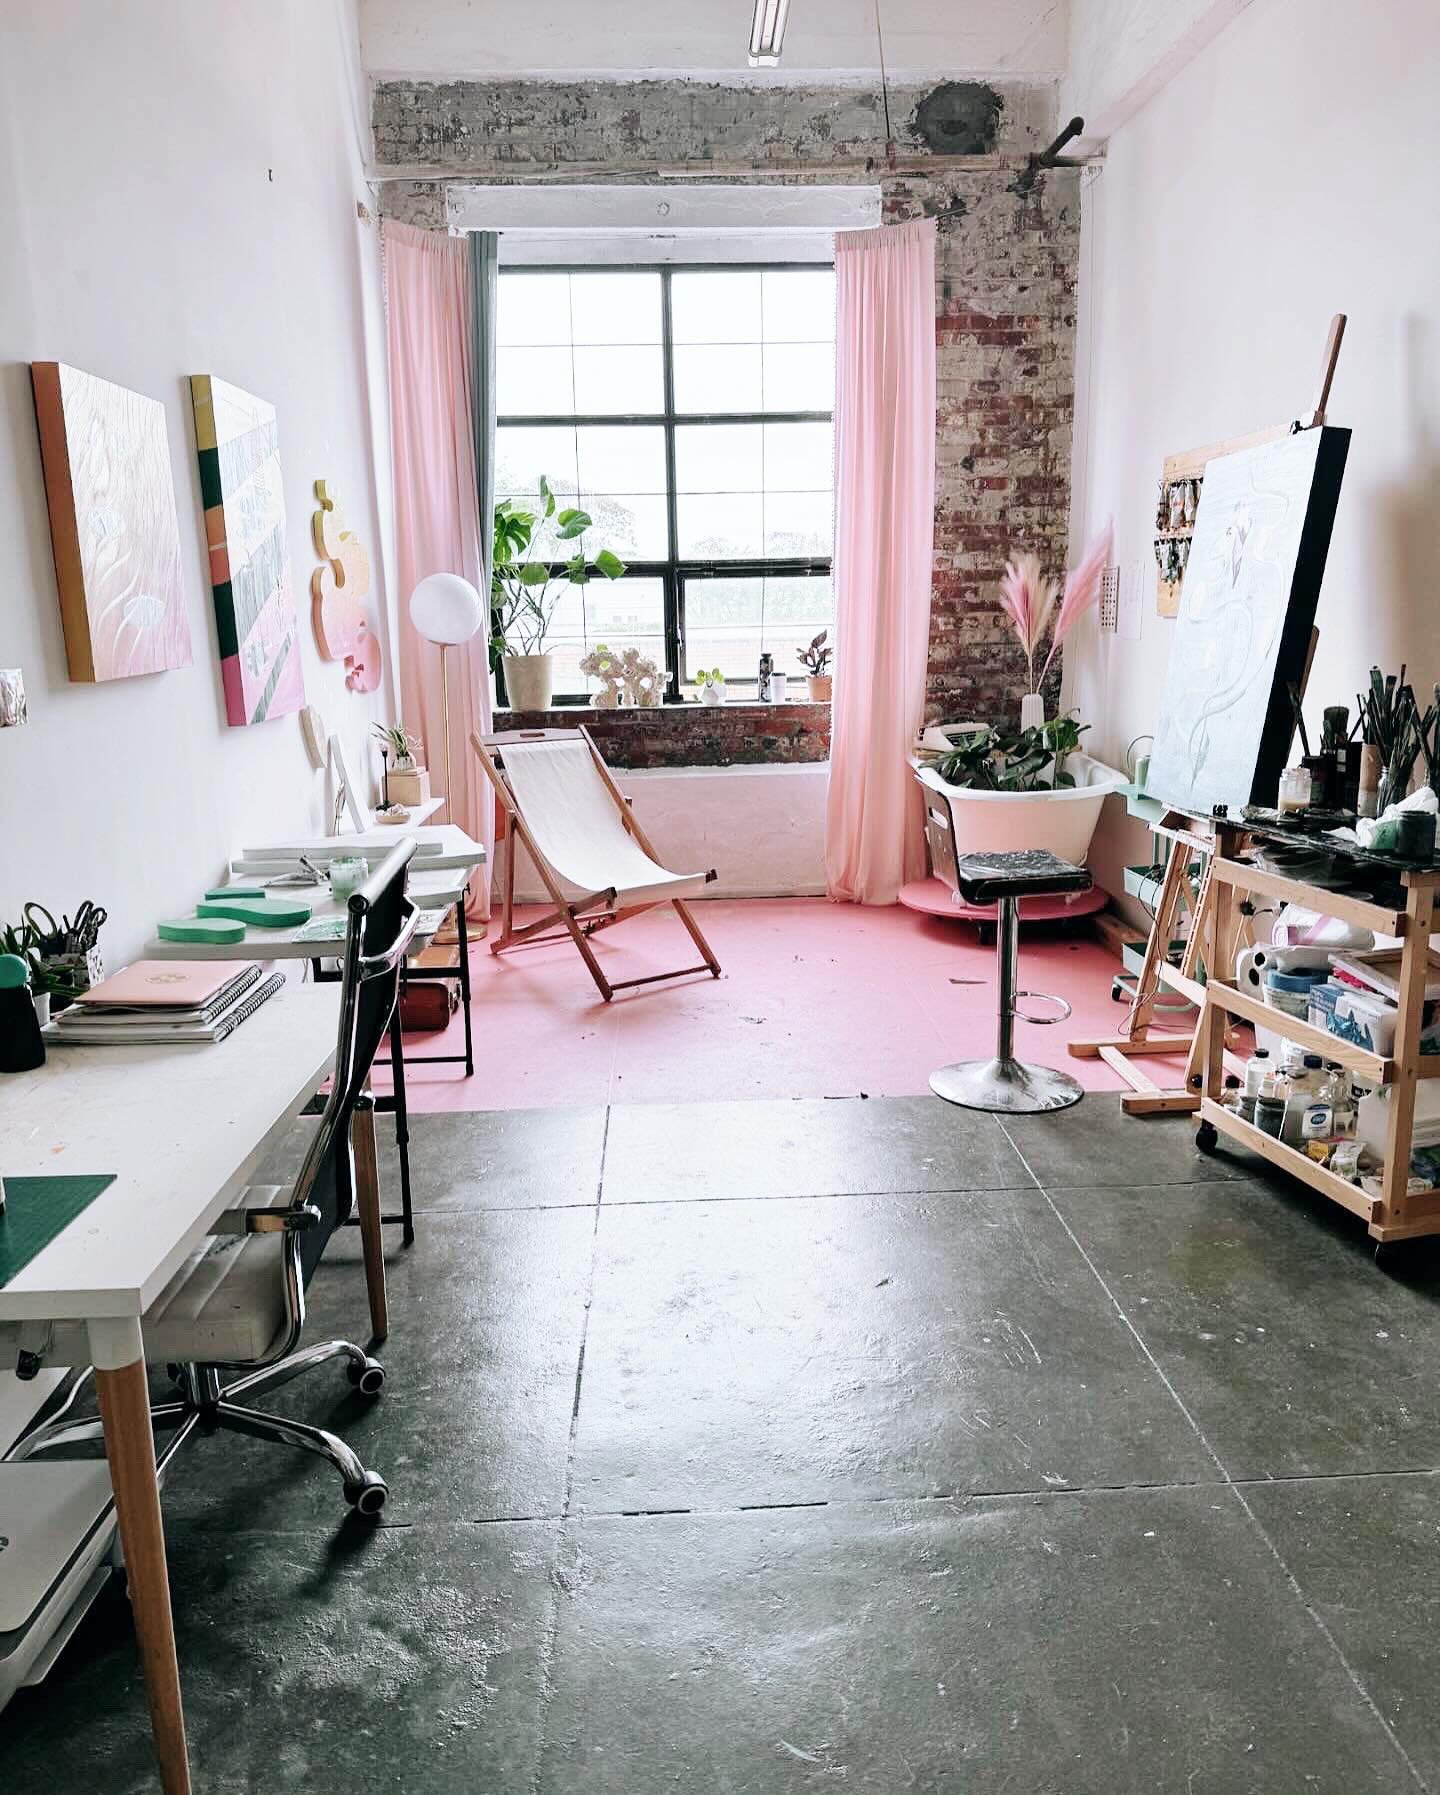 Ridgewood Studio sublet
May 20 - June 10 (flexible)

$750 for 3 weeks
24/7 access with fob
co-working space, freight elevator, trash and recycle, kitchen, minifridge, mail room
15 ft x 10ft available space (my things will be stored in the section by 